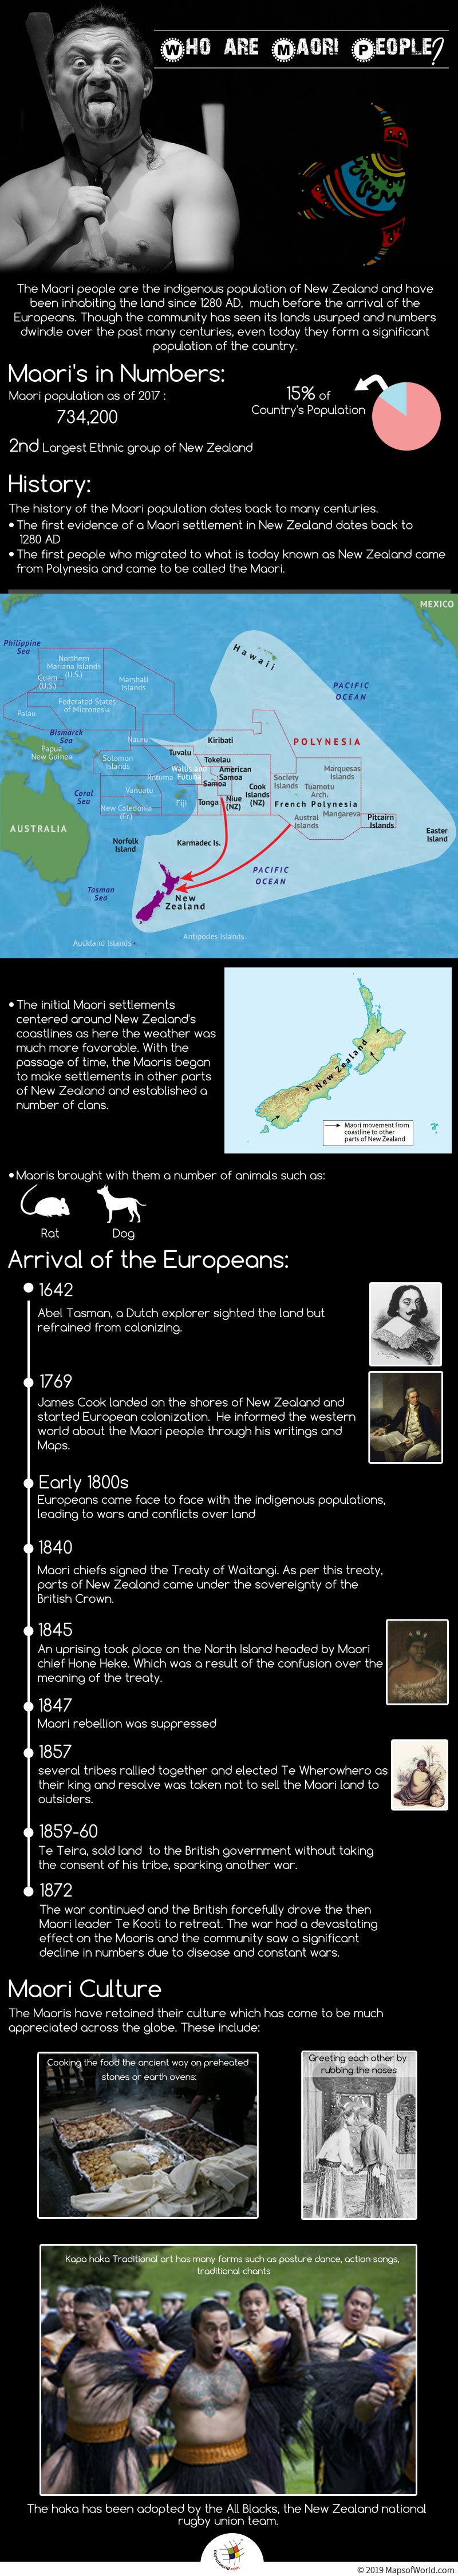 Infographic Giving Details About Maori People